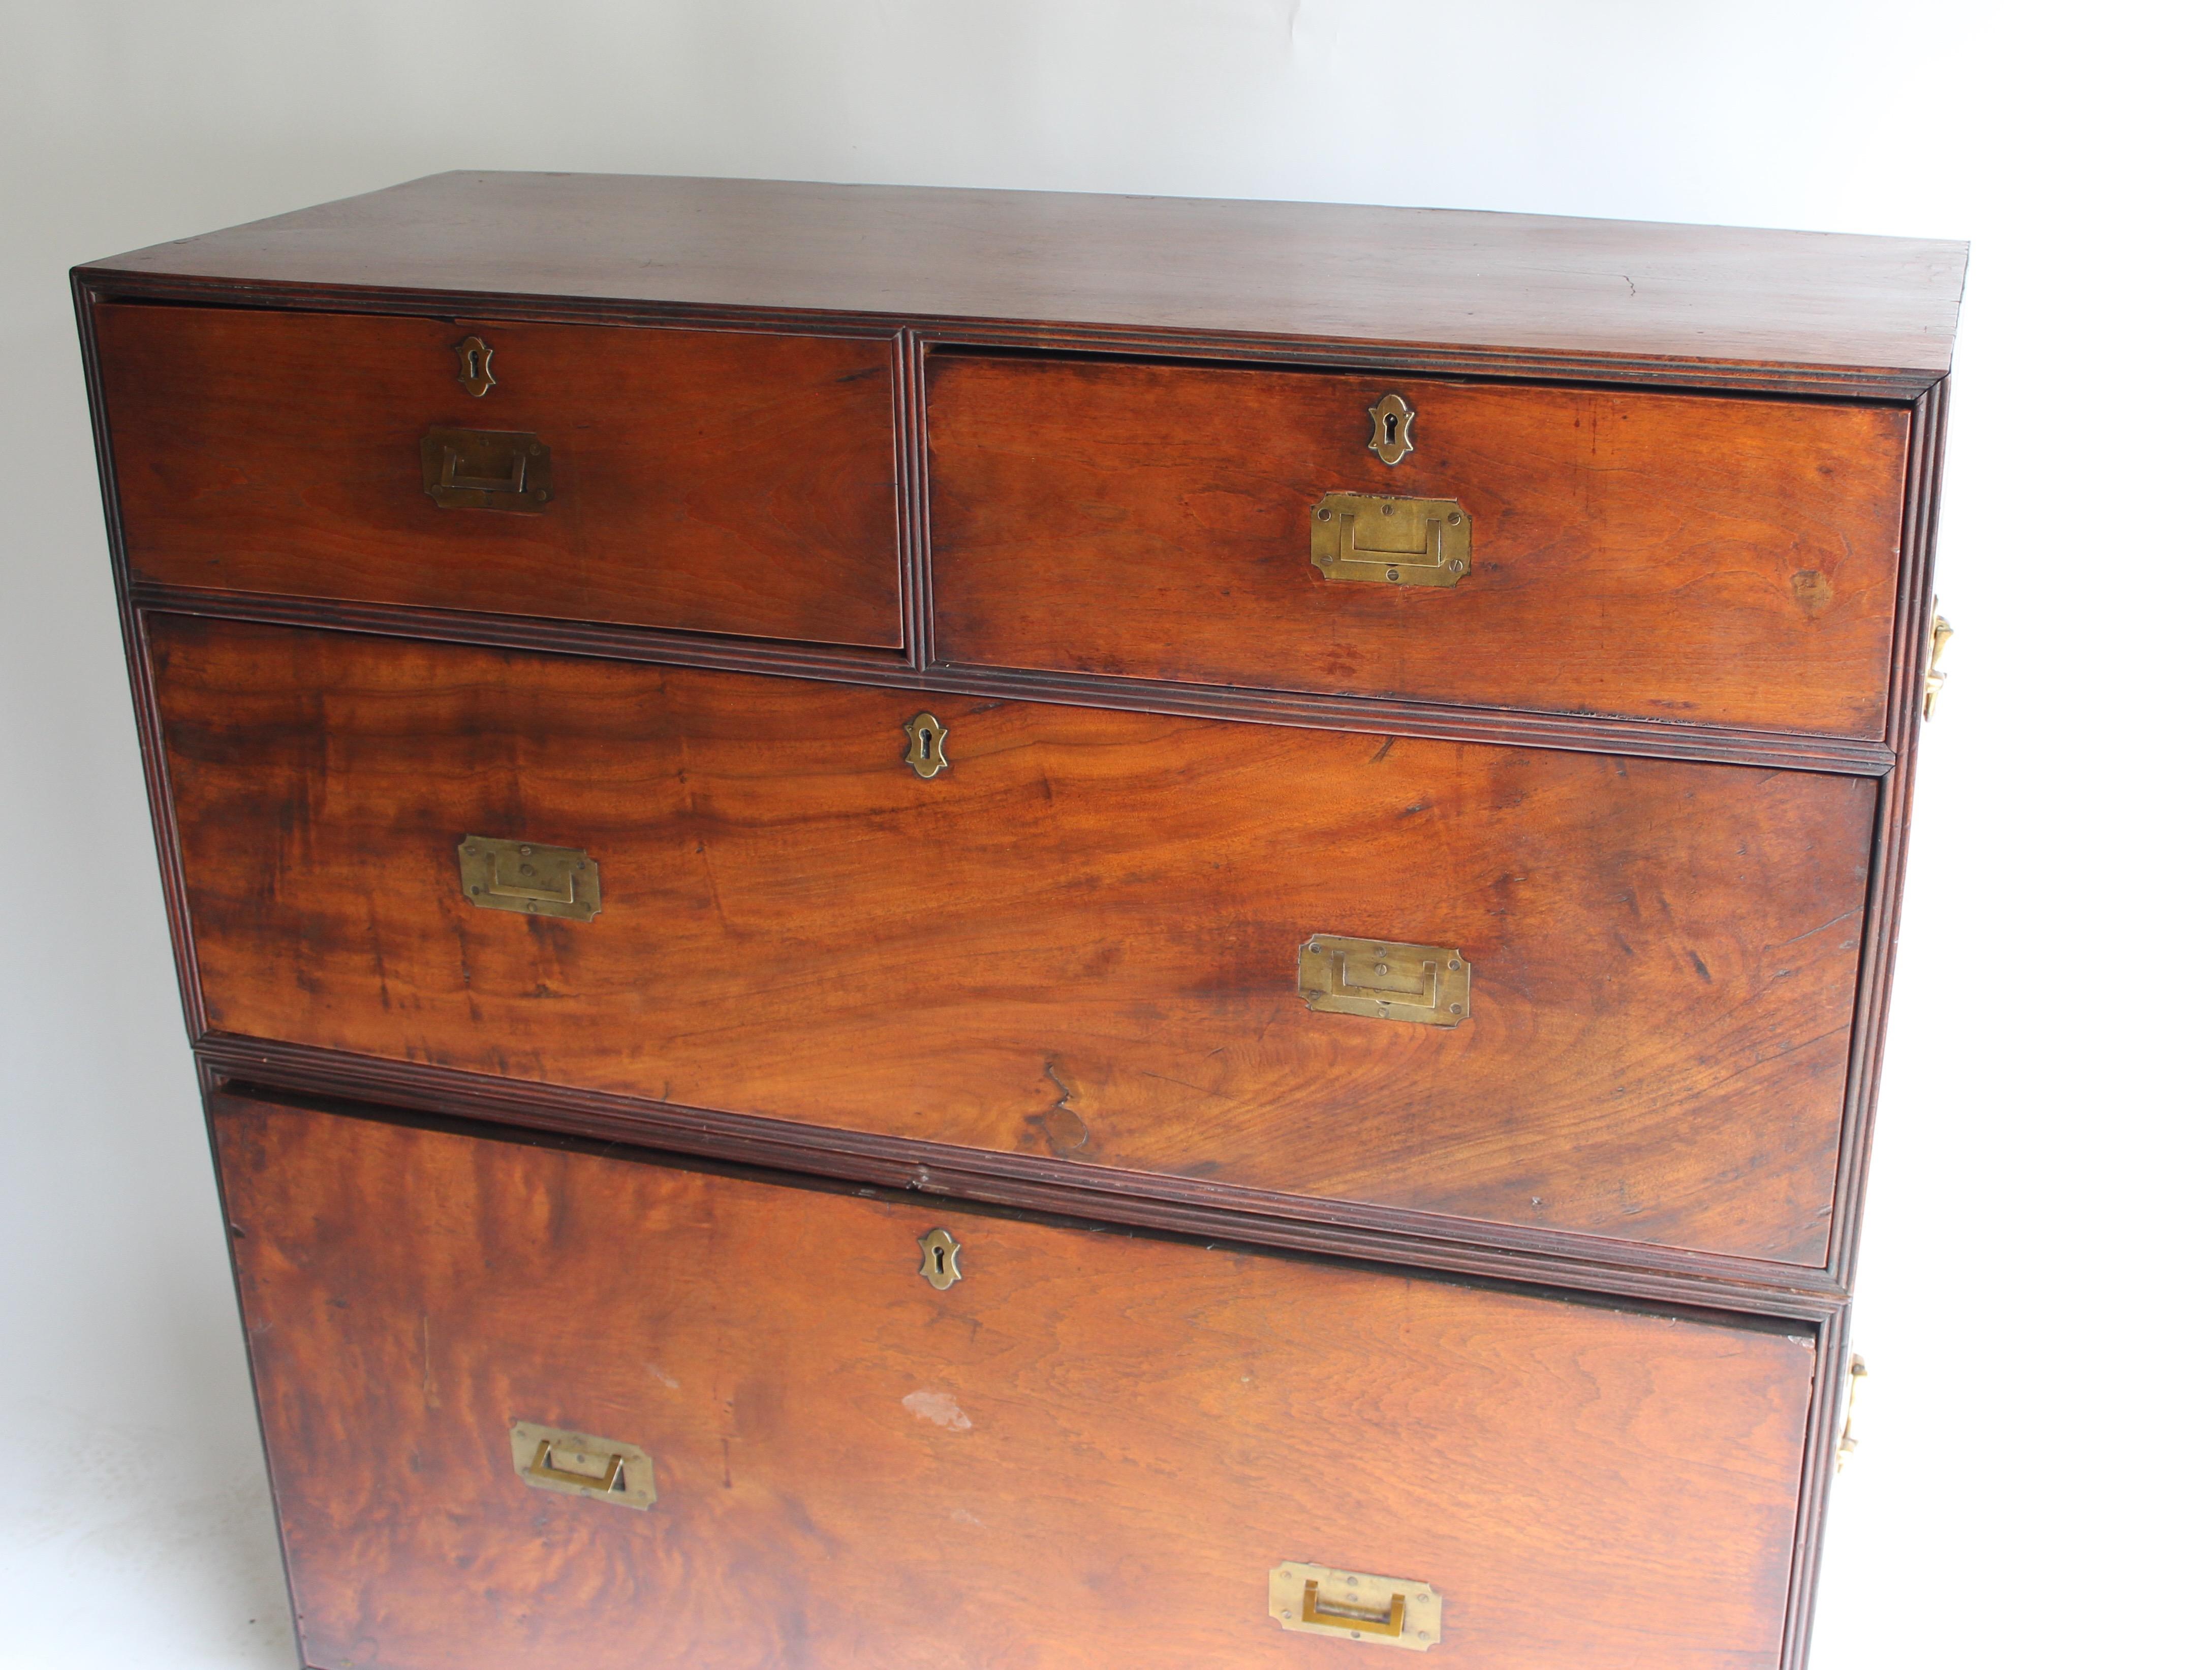 19th century two-part Campaign chest having four drawers... top right drawer is divided into two compartments, one of which has a small secret drawer.